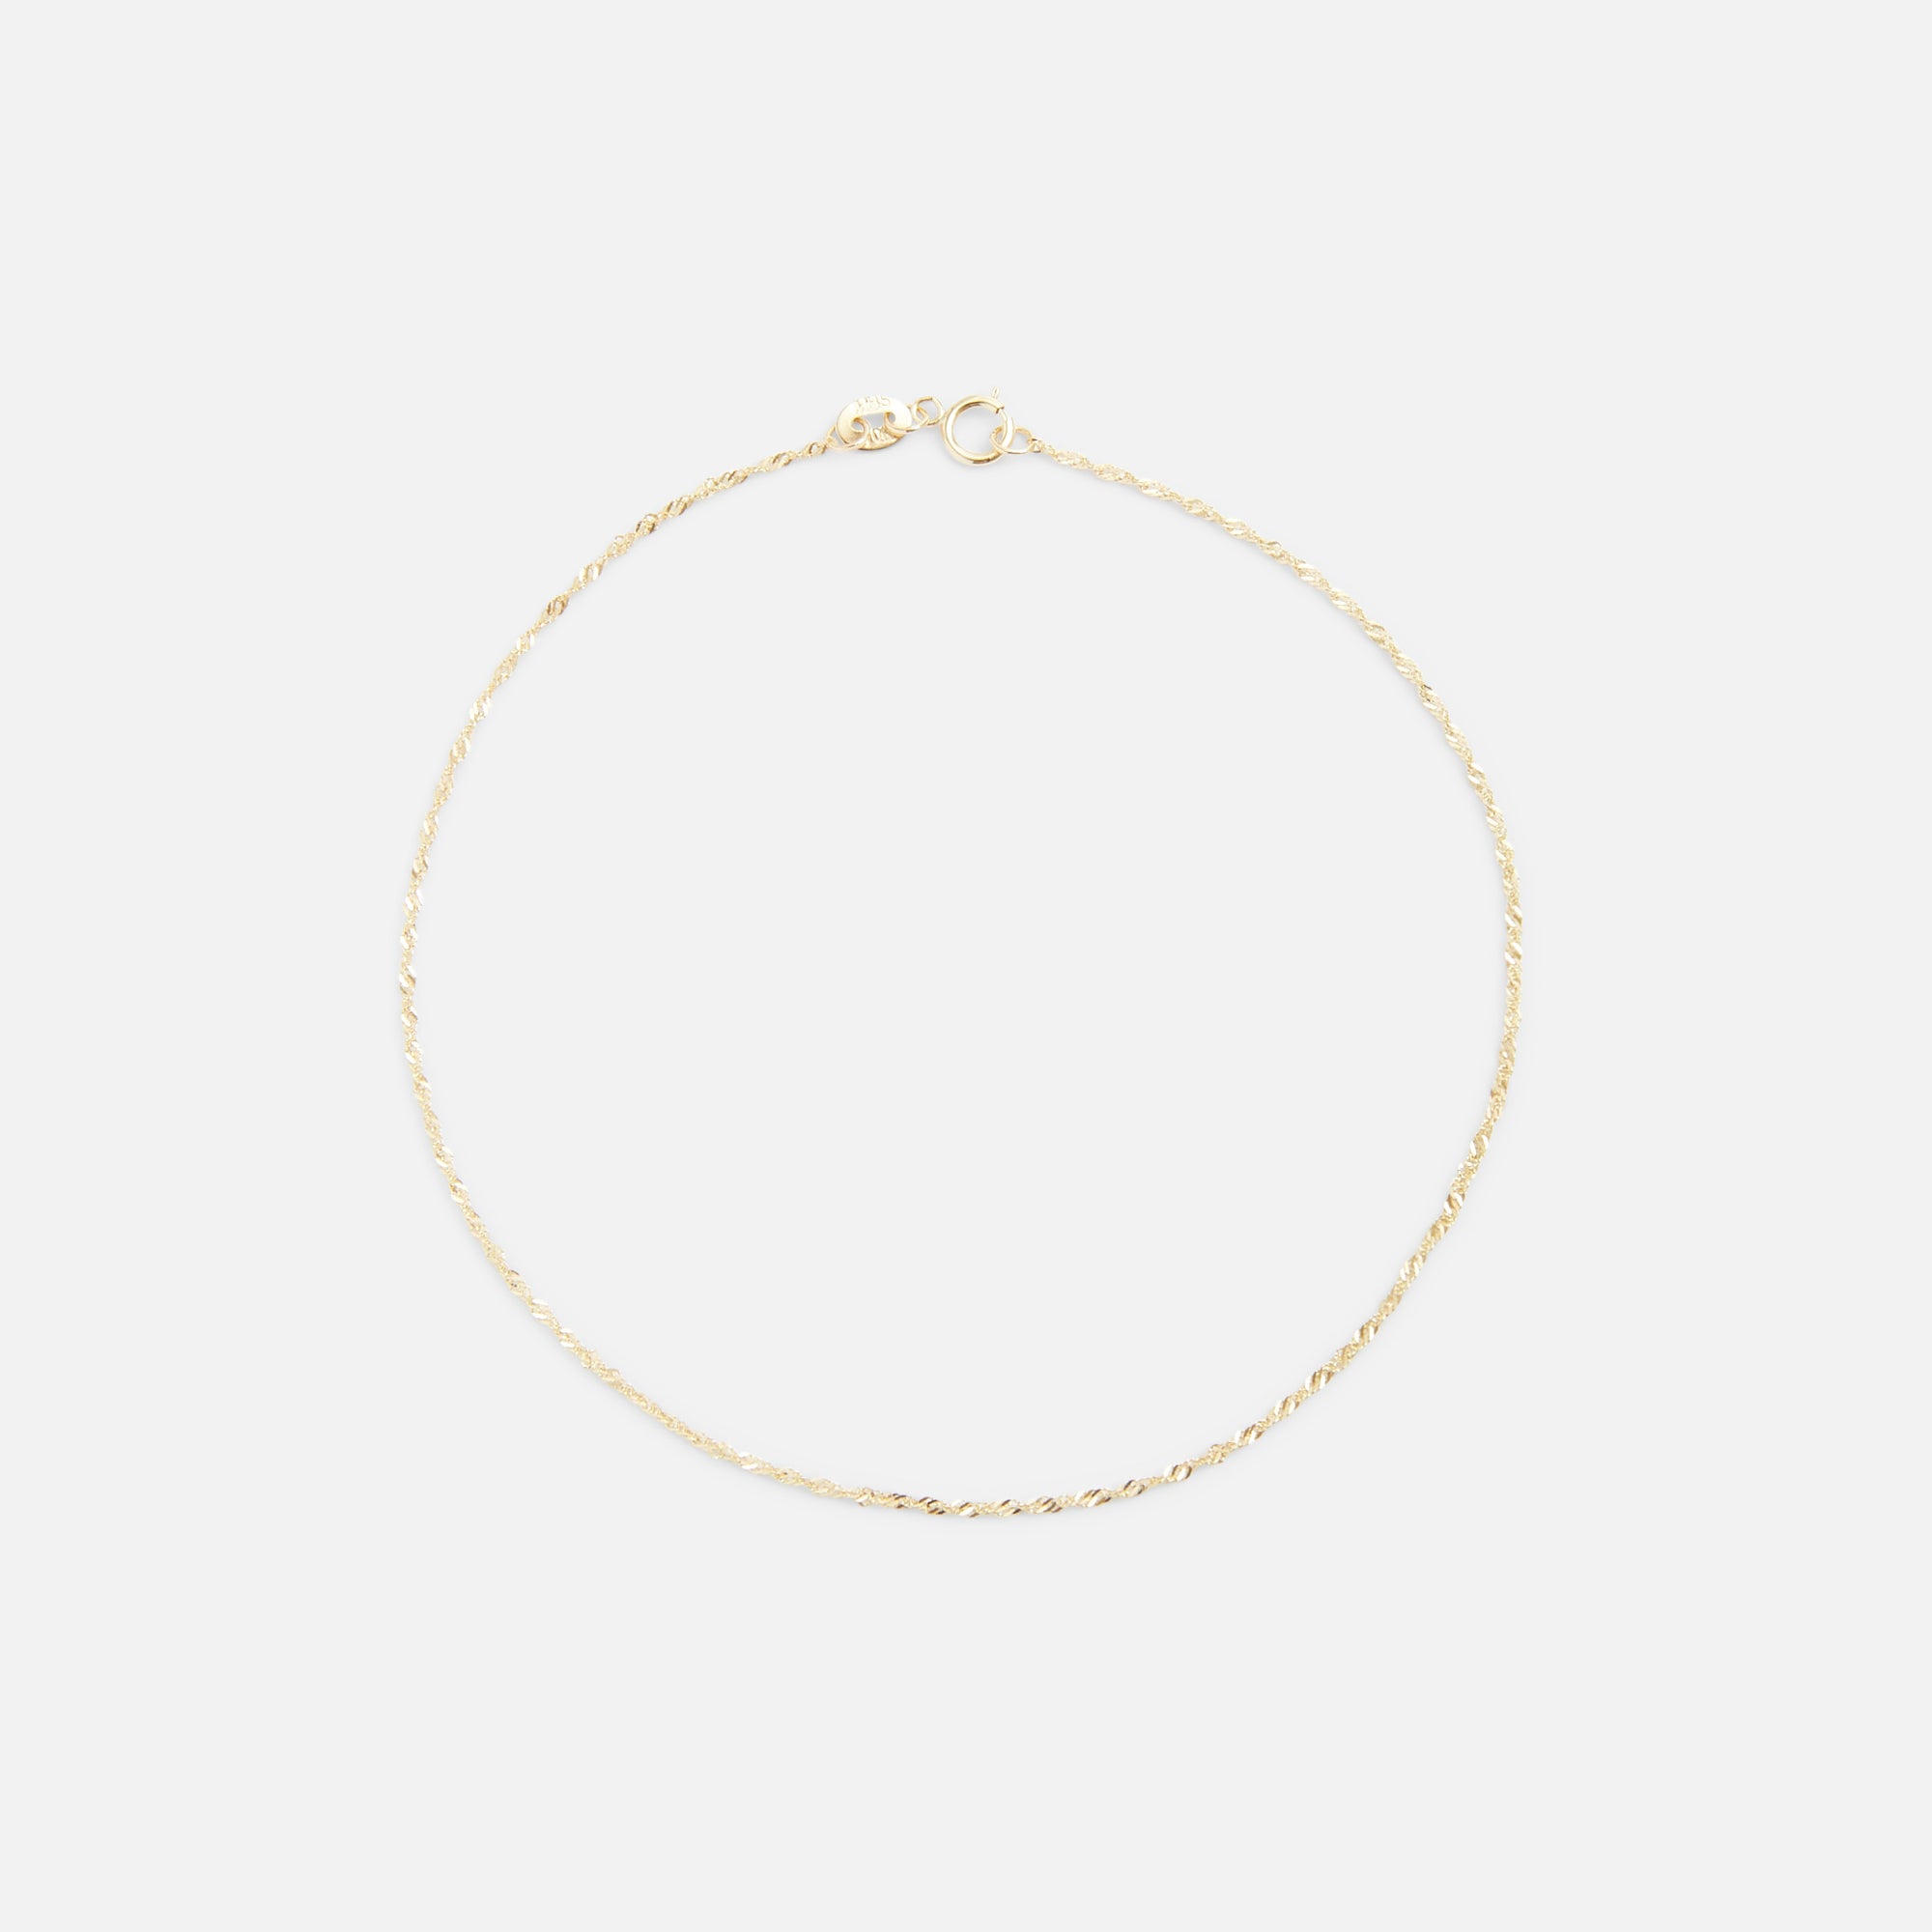 10k Gold singapore ankle chain